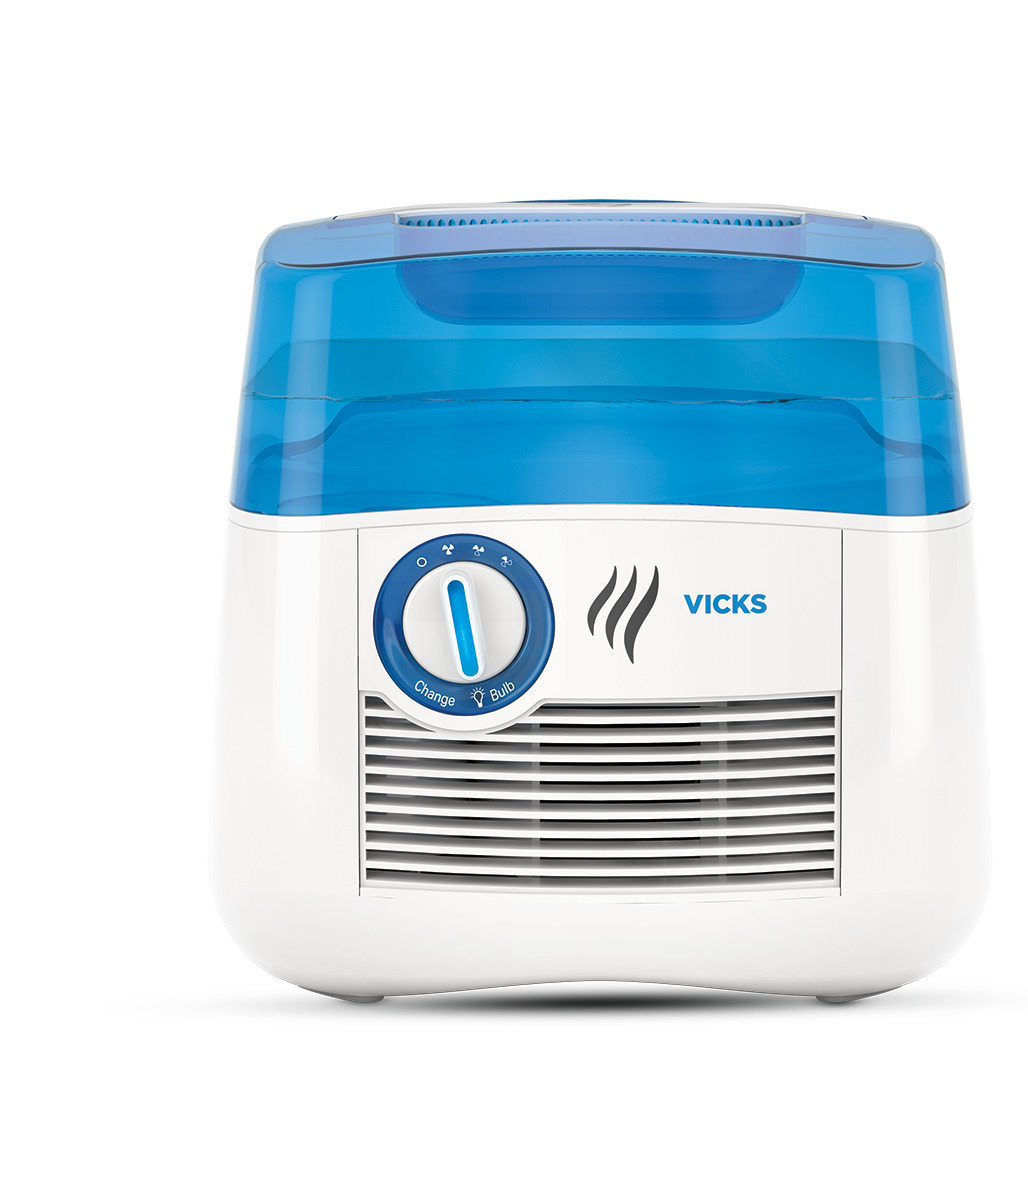 Vicks 1 gal 400 sq ft Cool Moisture Humidifier with UV Technology, V3900, Blue/White - image 1 of 12